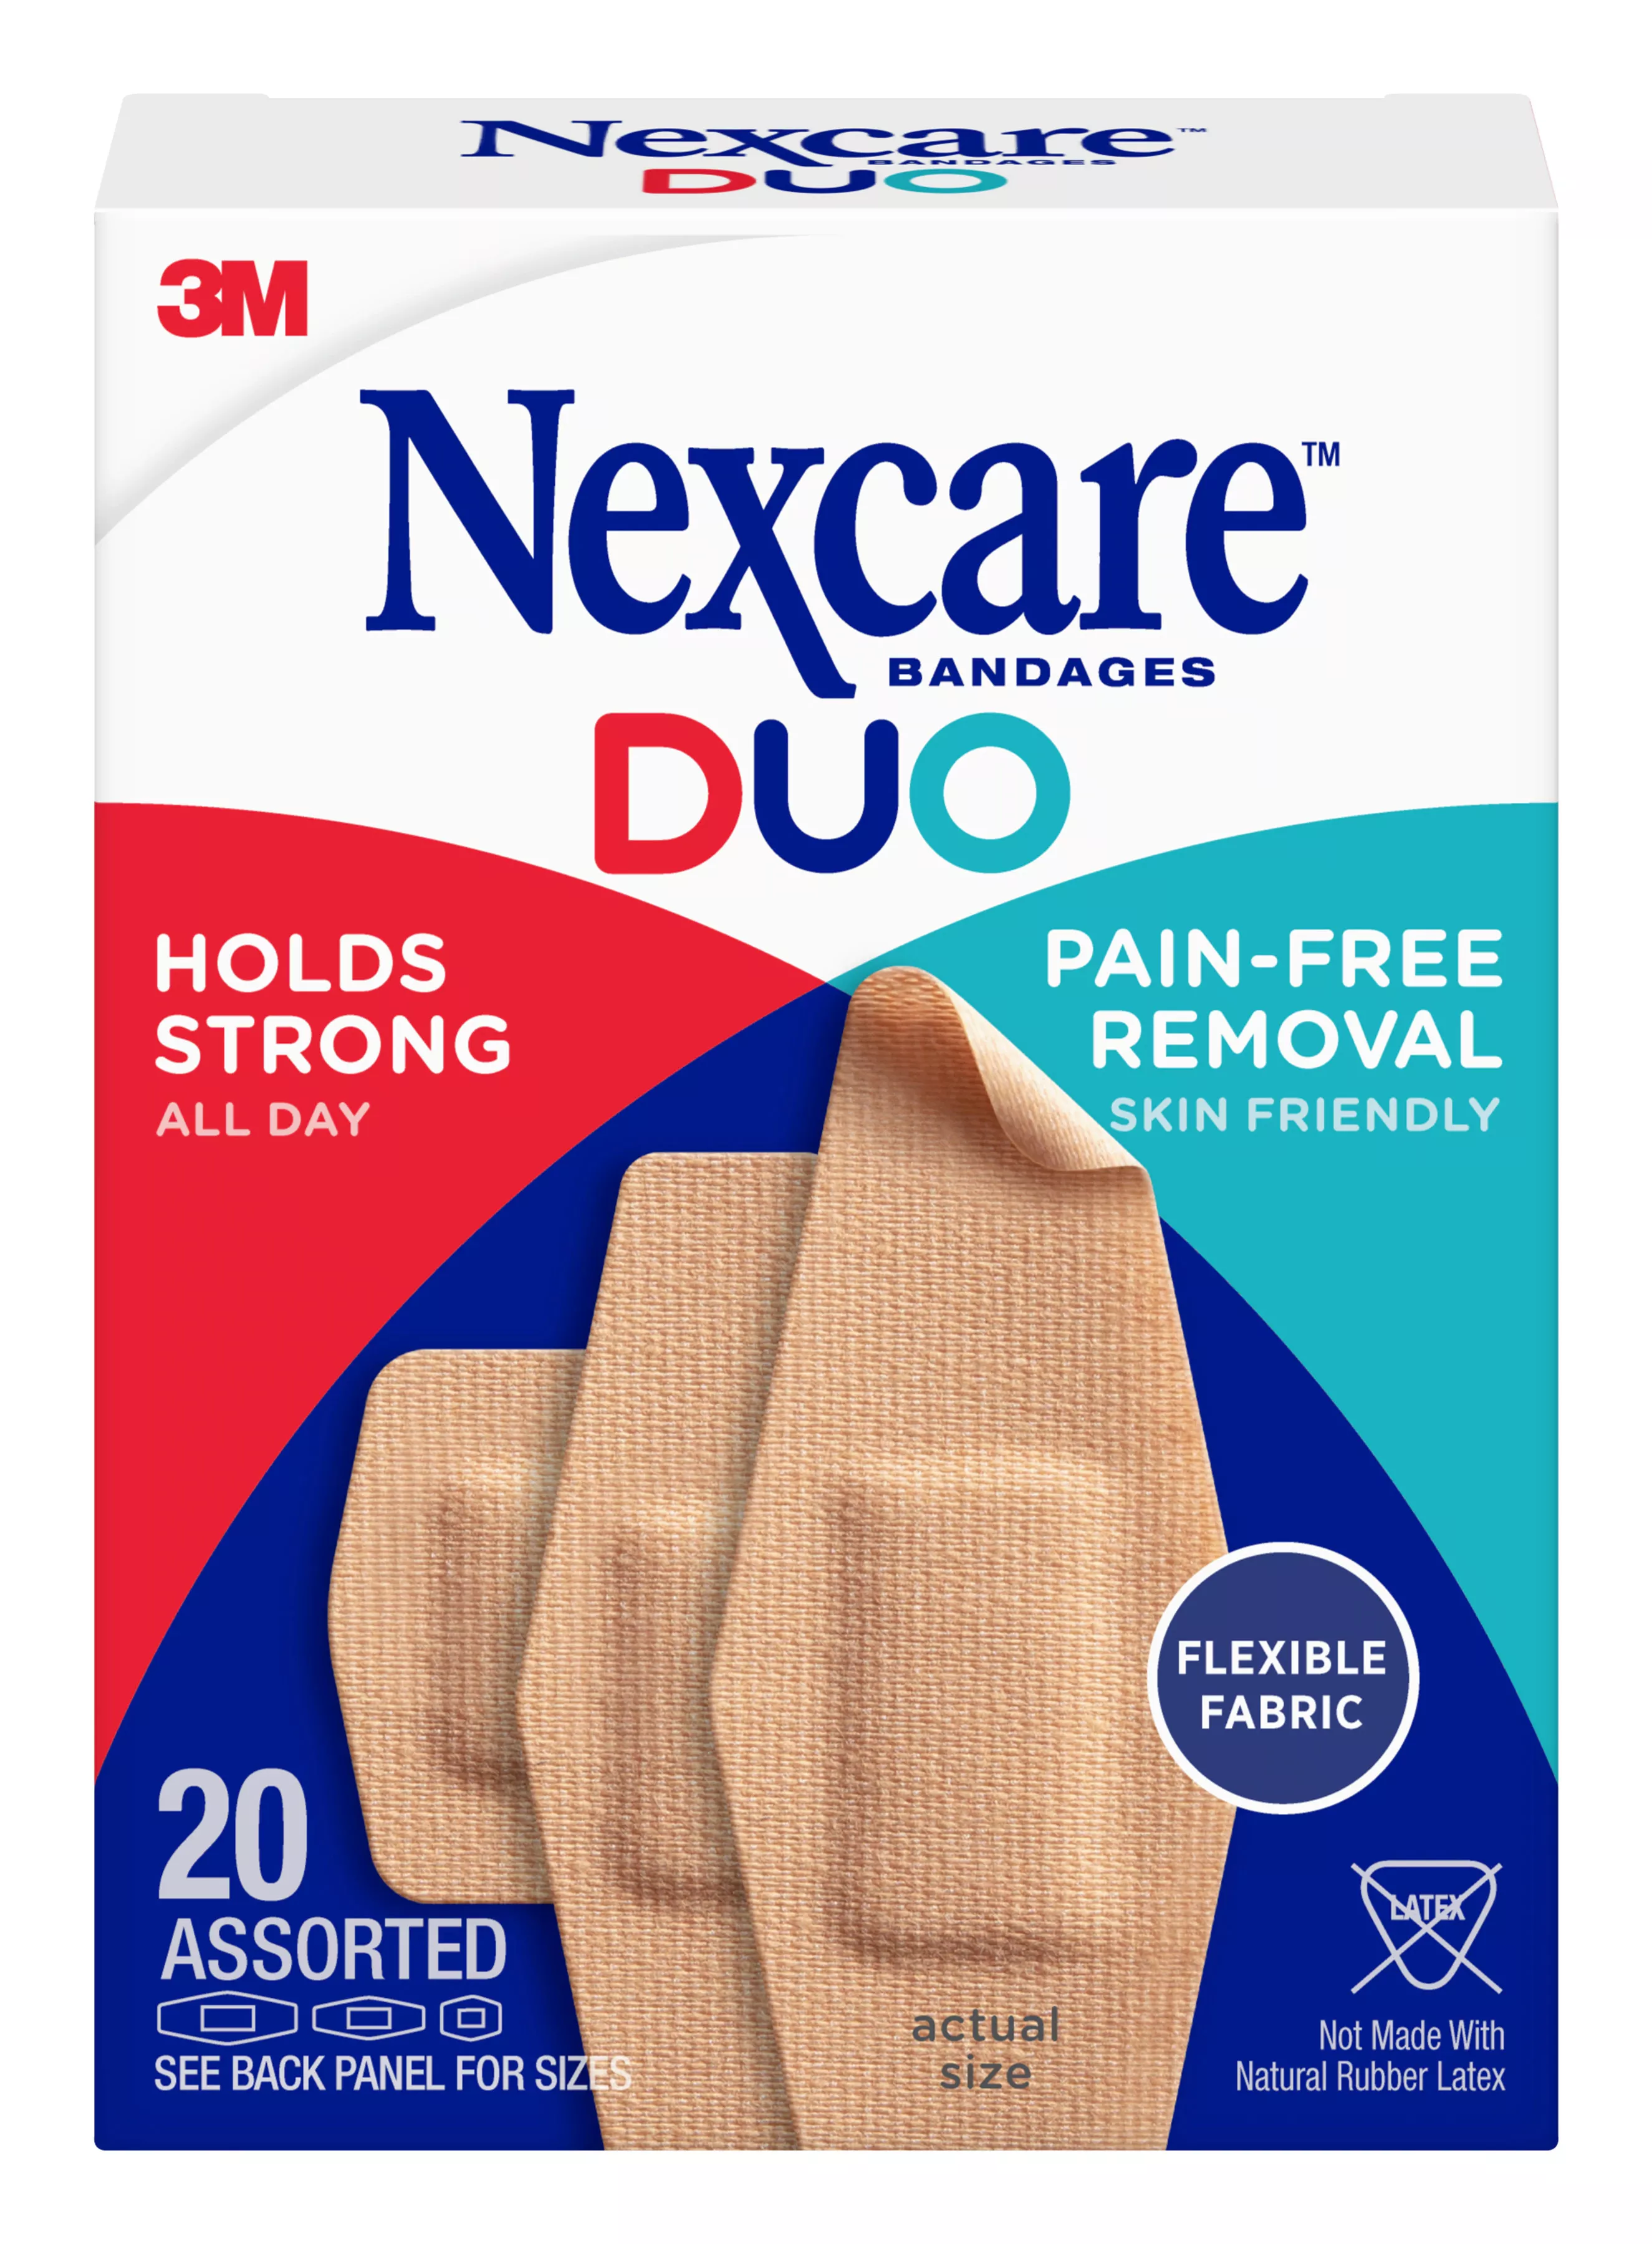 Nexcare™ DUO Bandages DSA-20, Assorted 20 ct